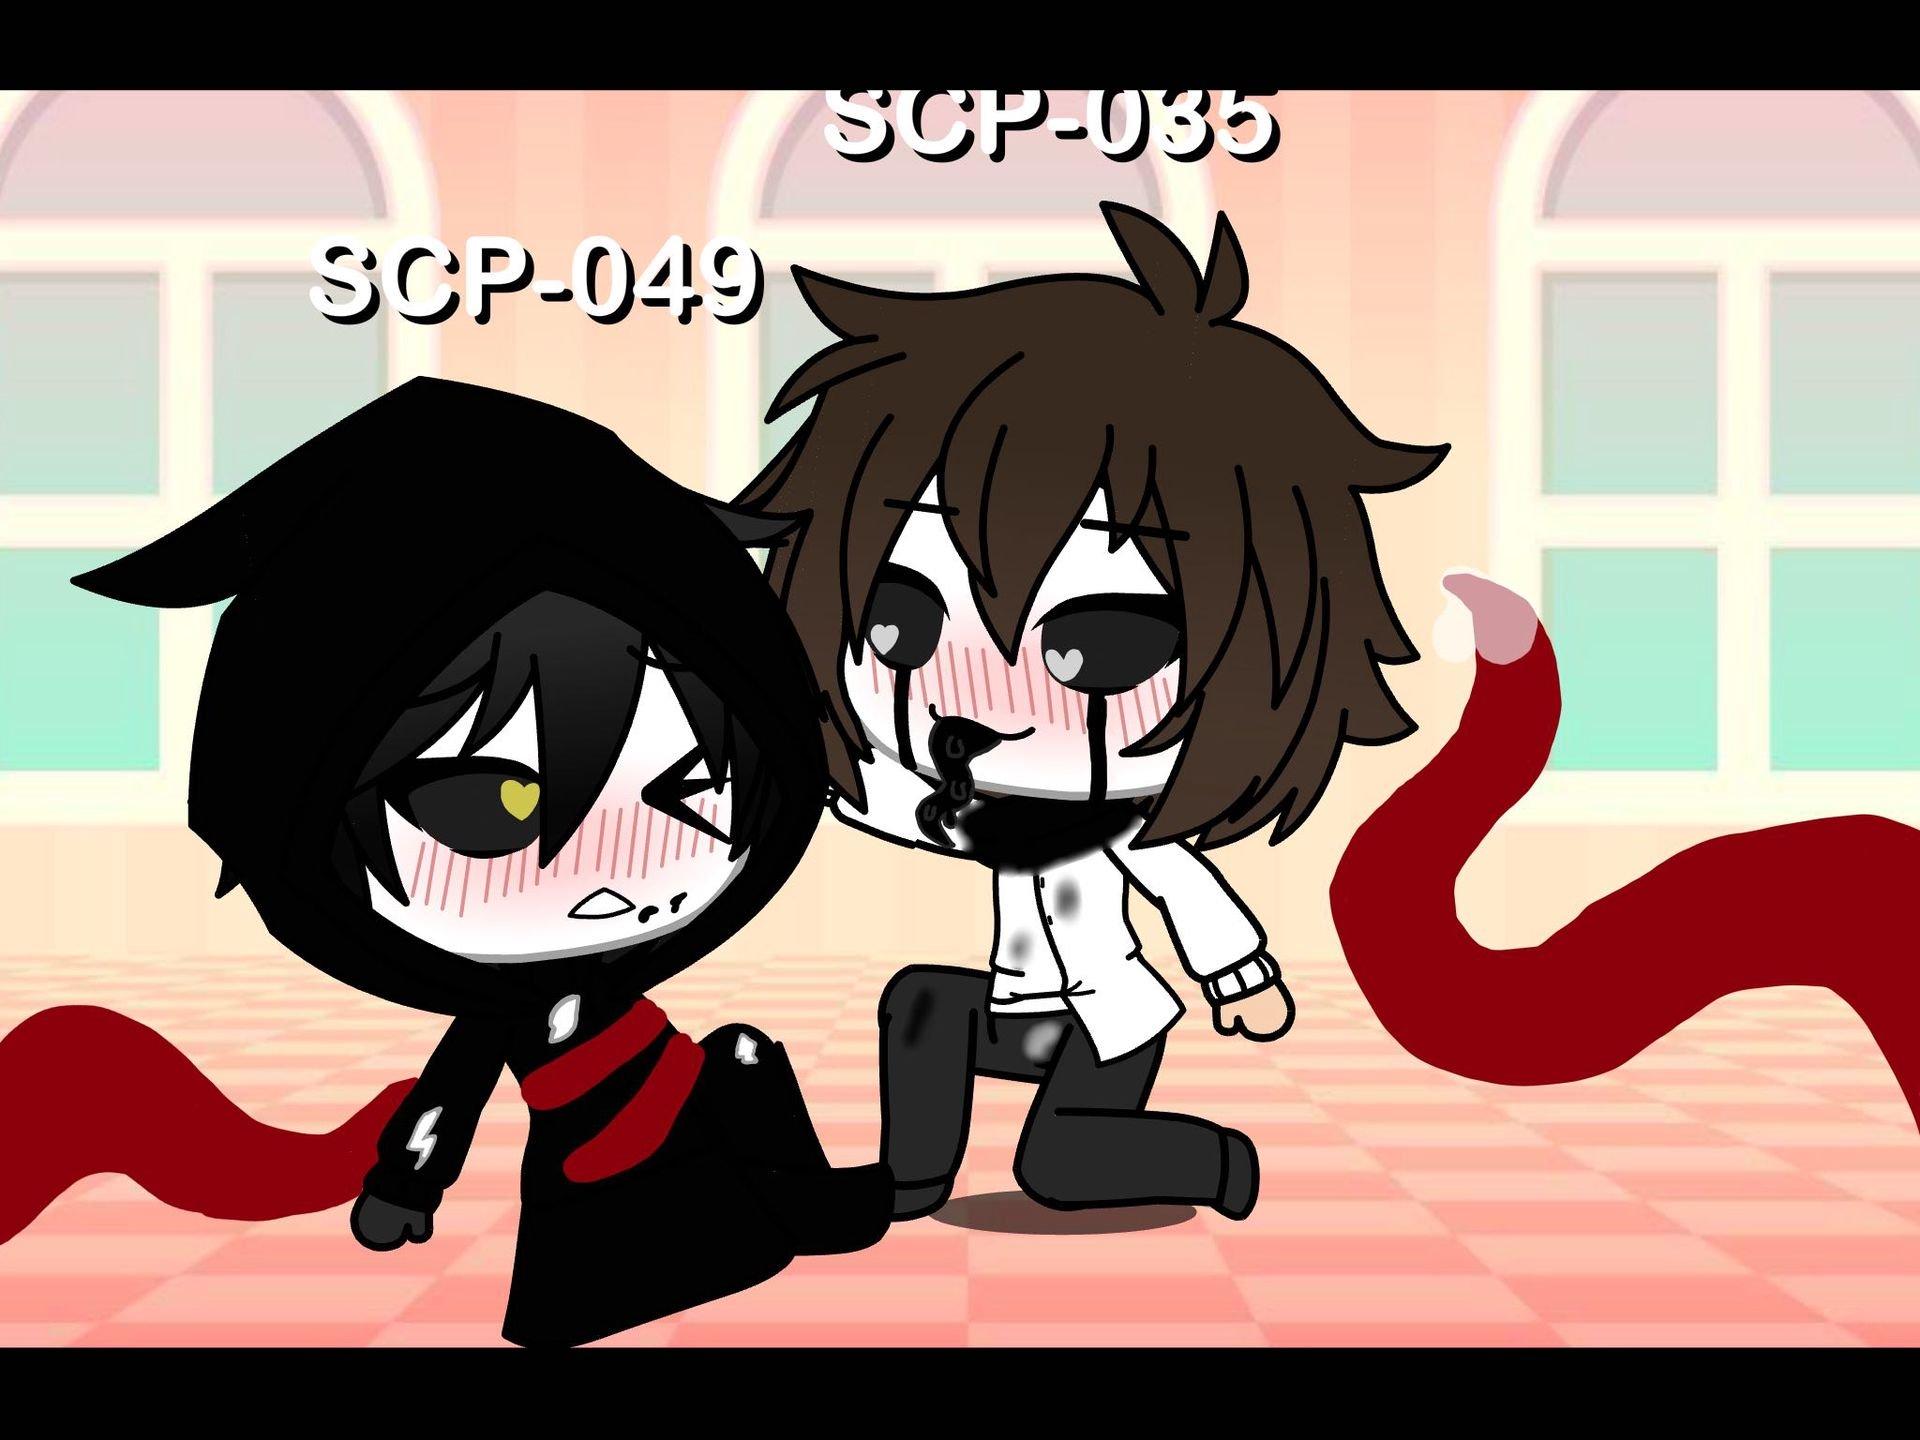 Scp 049 x 035  Scp 049, Scp, Anime